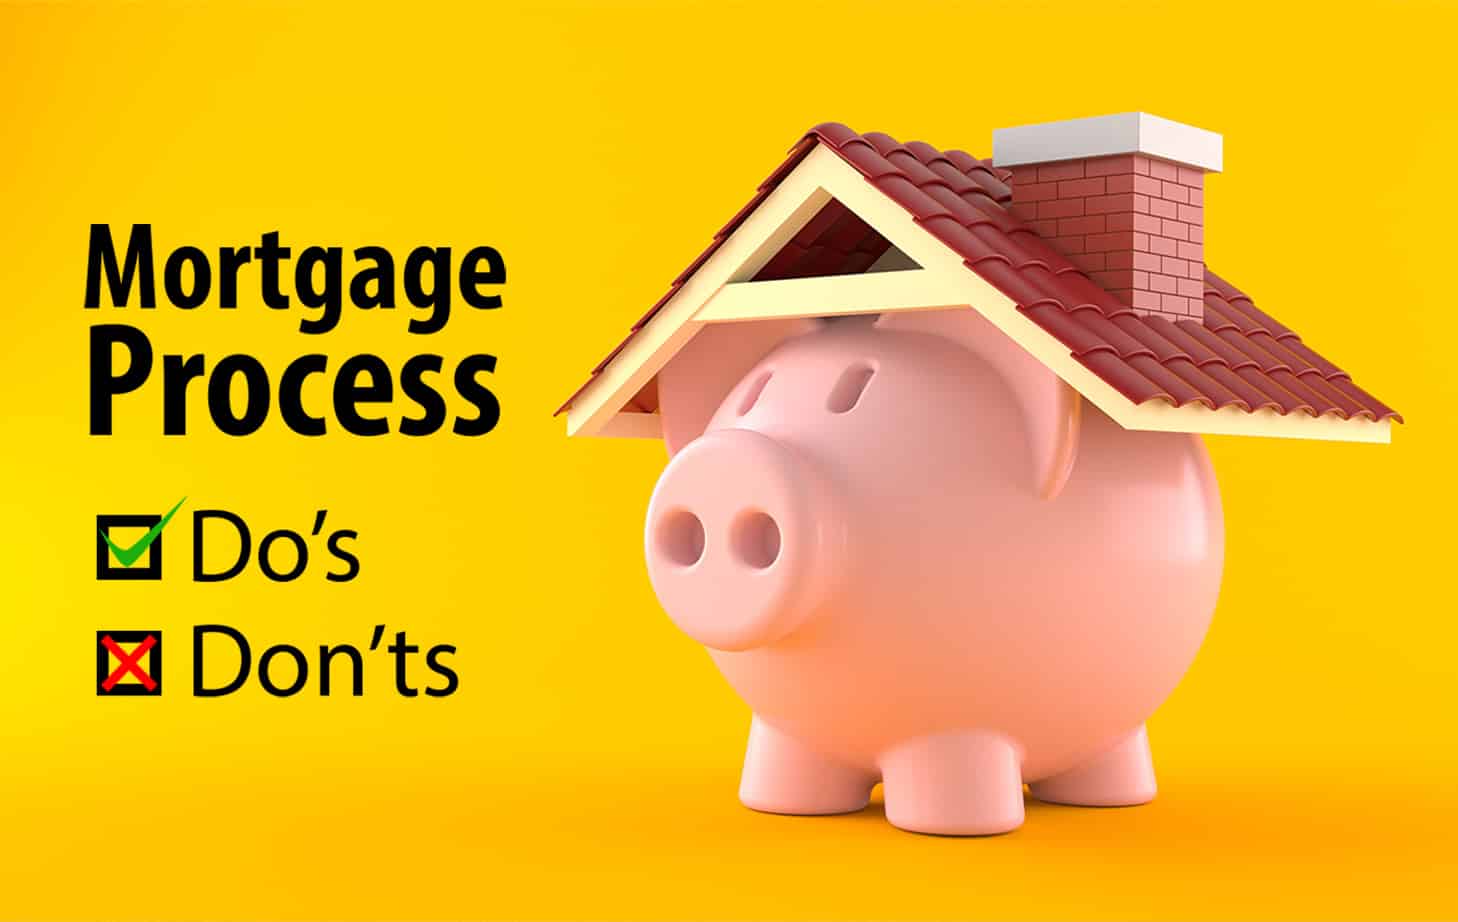 do's and don'ts of the mortgage process